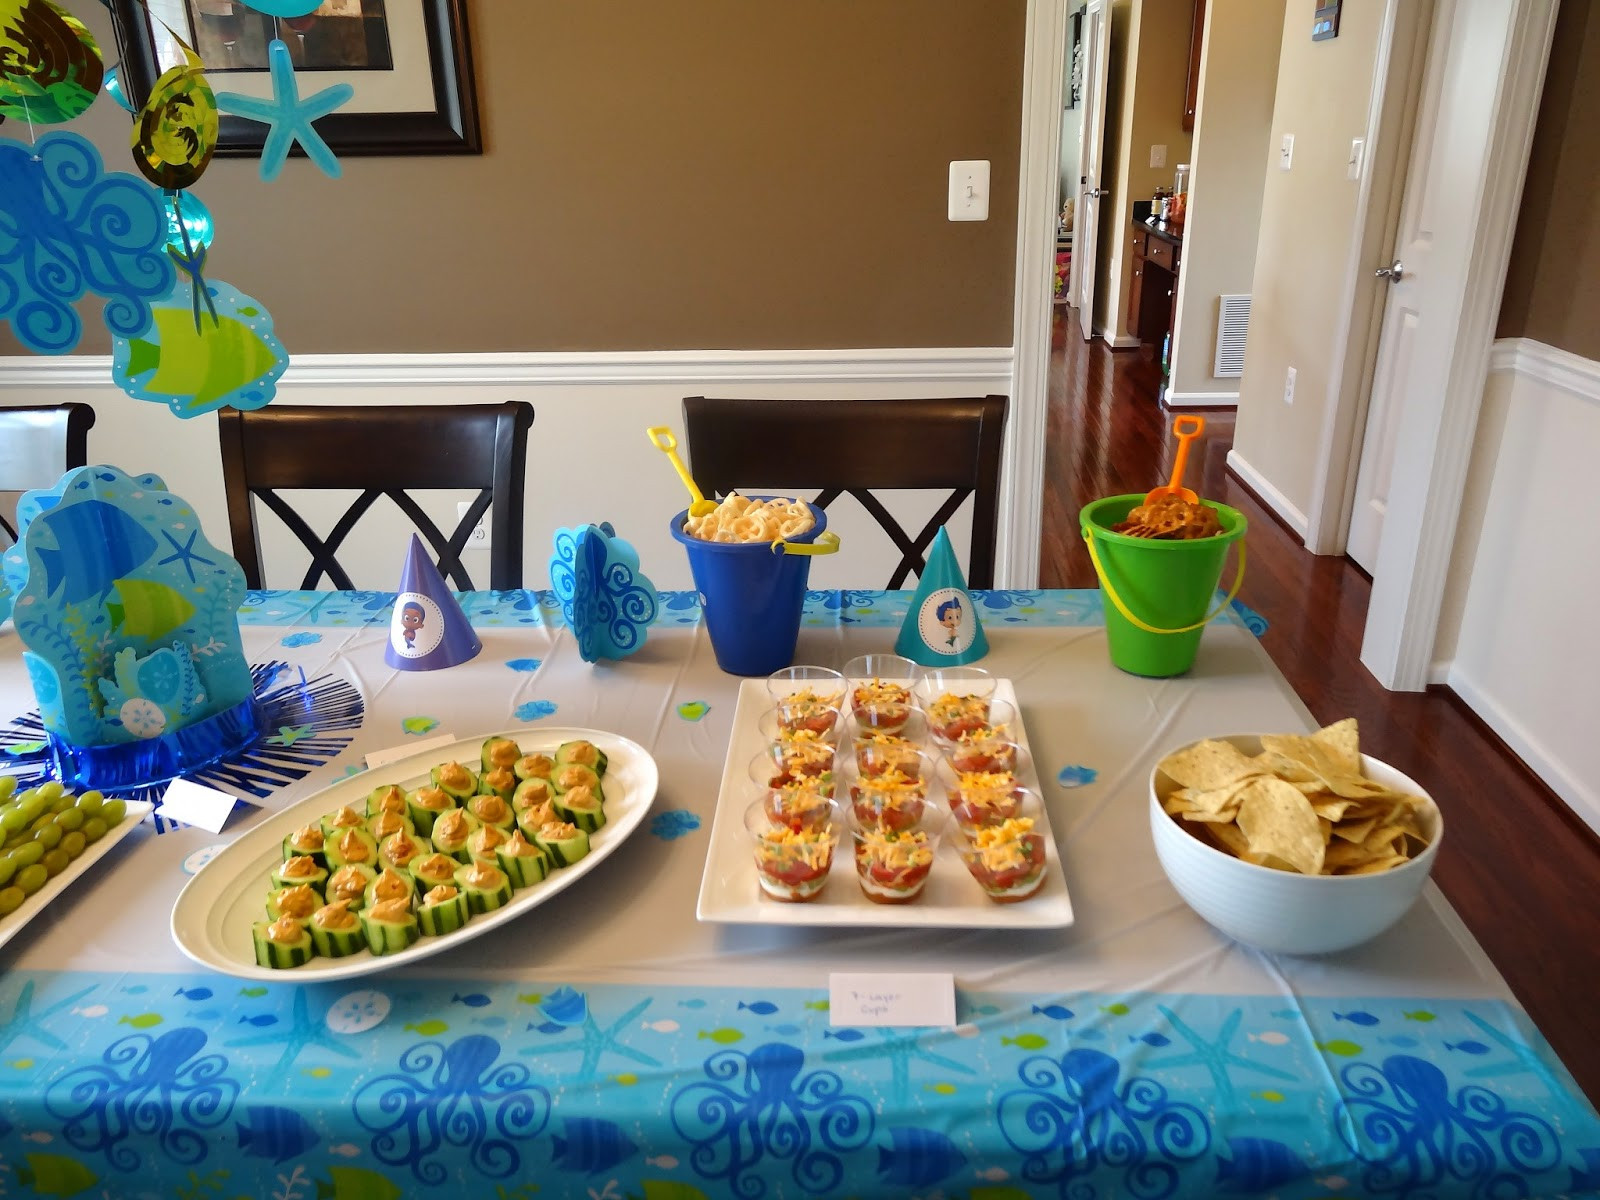 Bubble Guppies Party Food Ideas
 Thoman House A Bubble Guppies Party